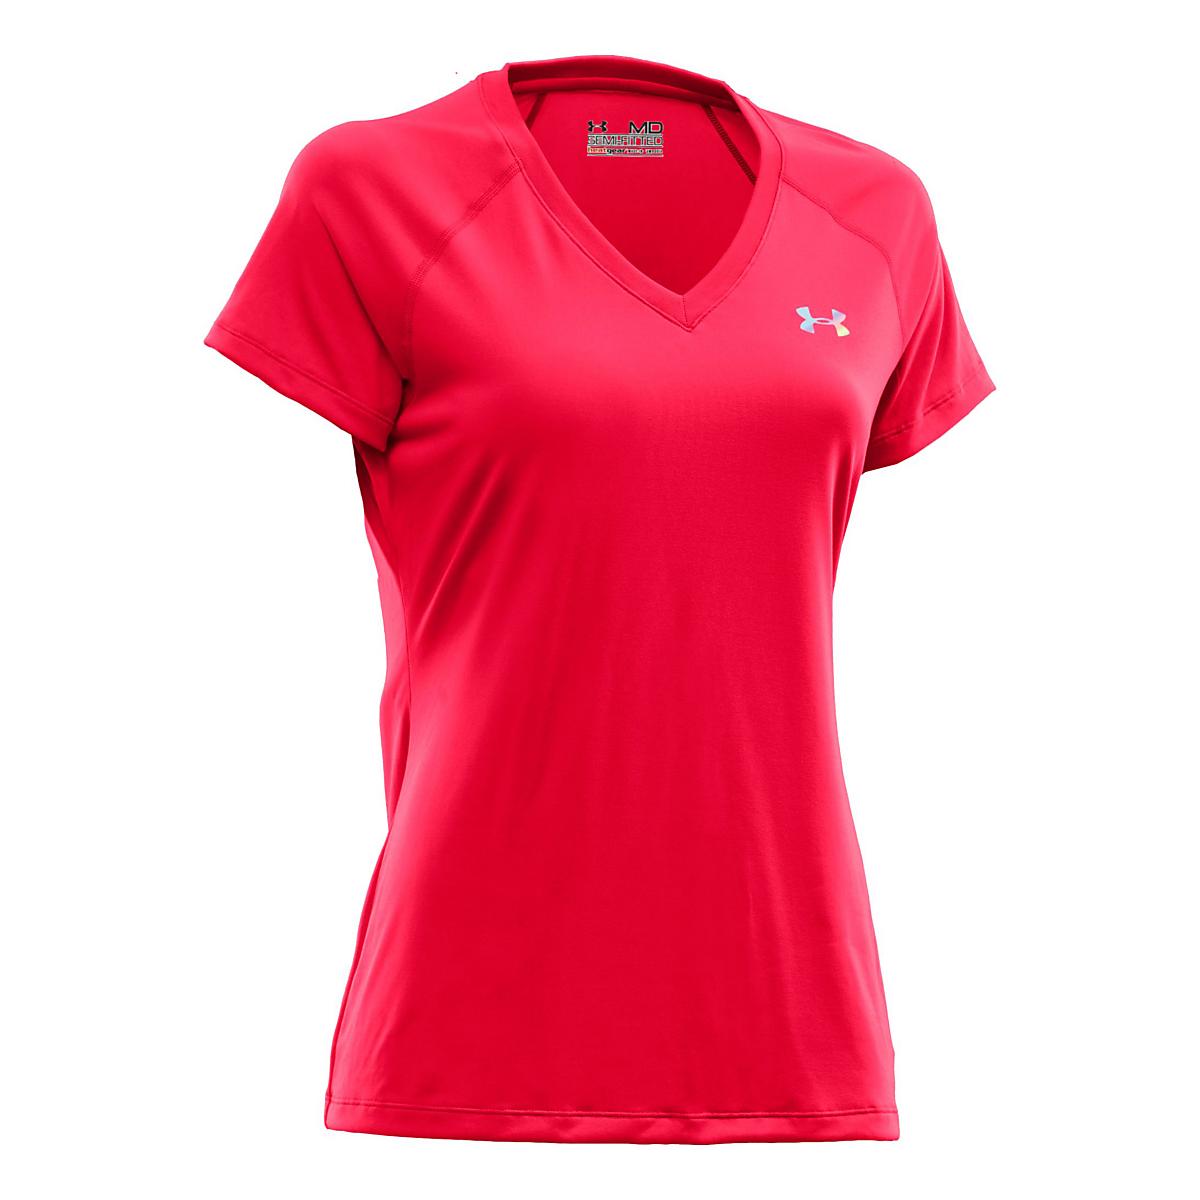 Womens Under Armour Tech Shortsleeve T Technical Tops at Road Runner Sports